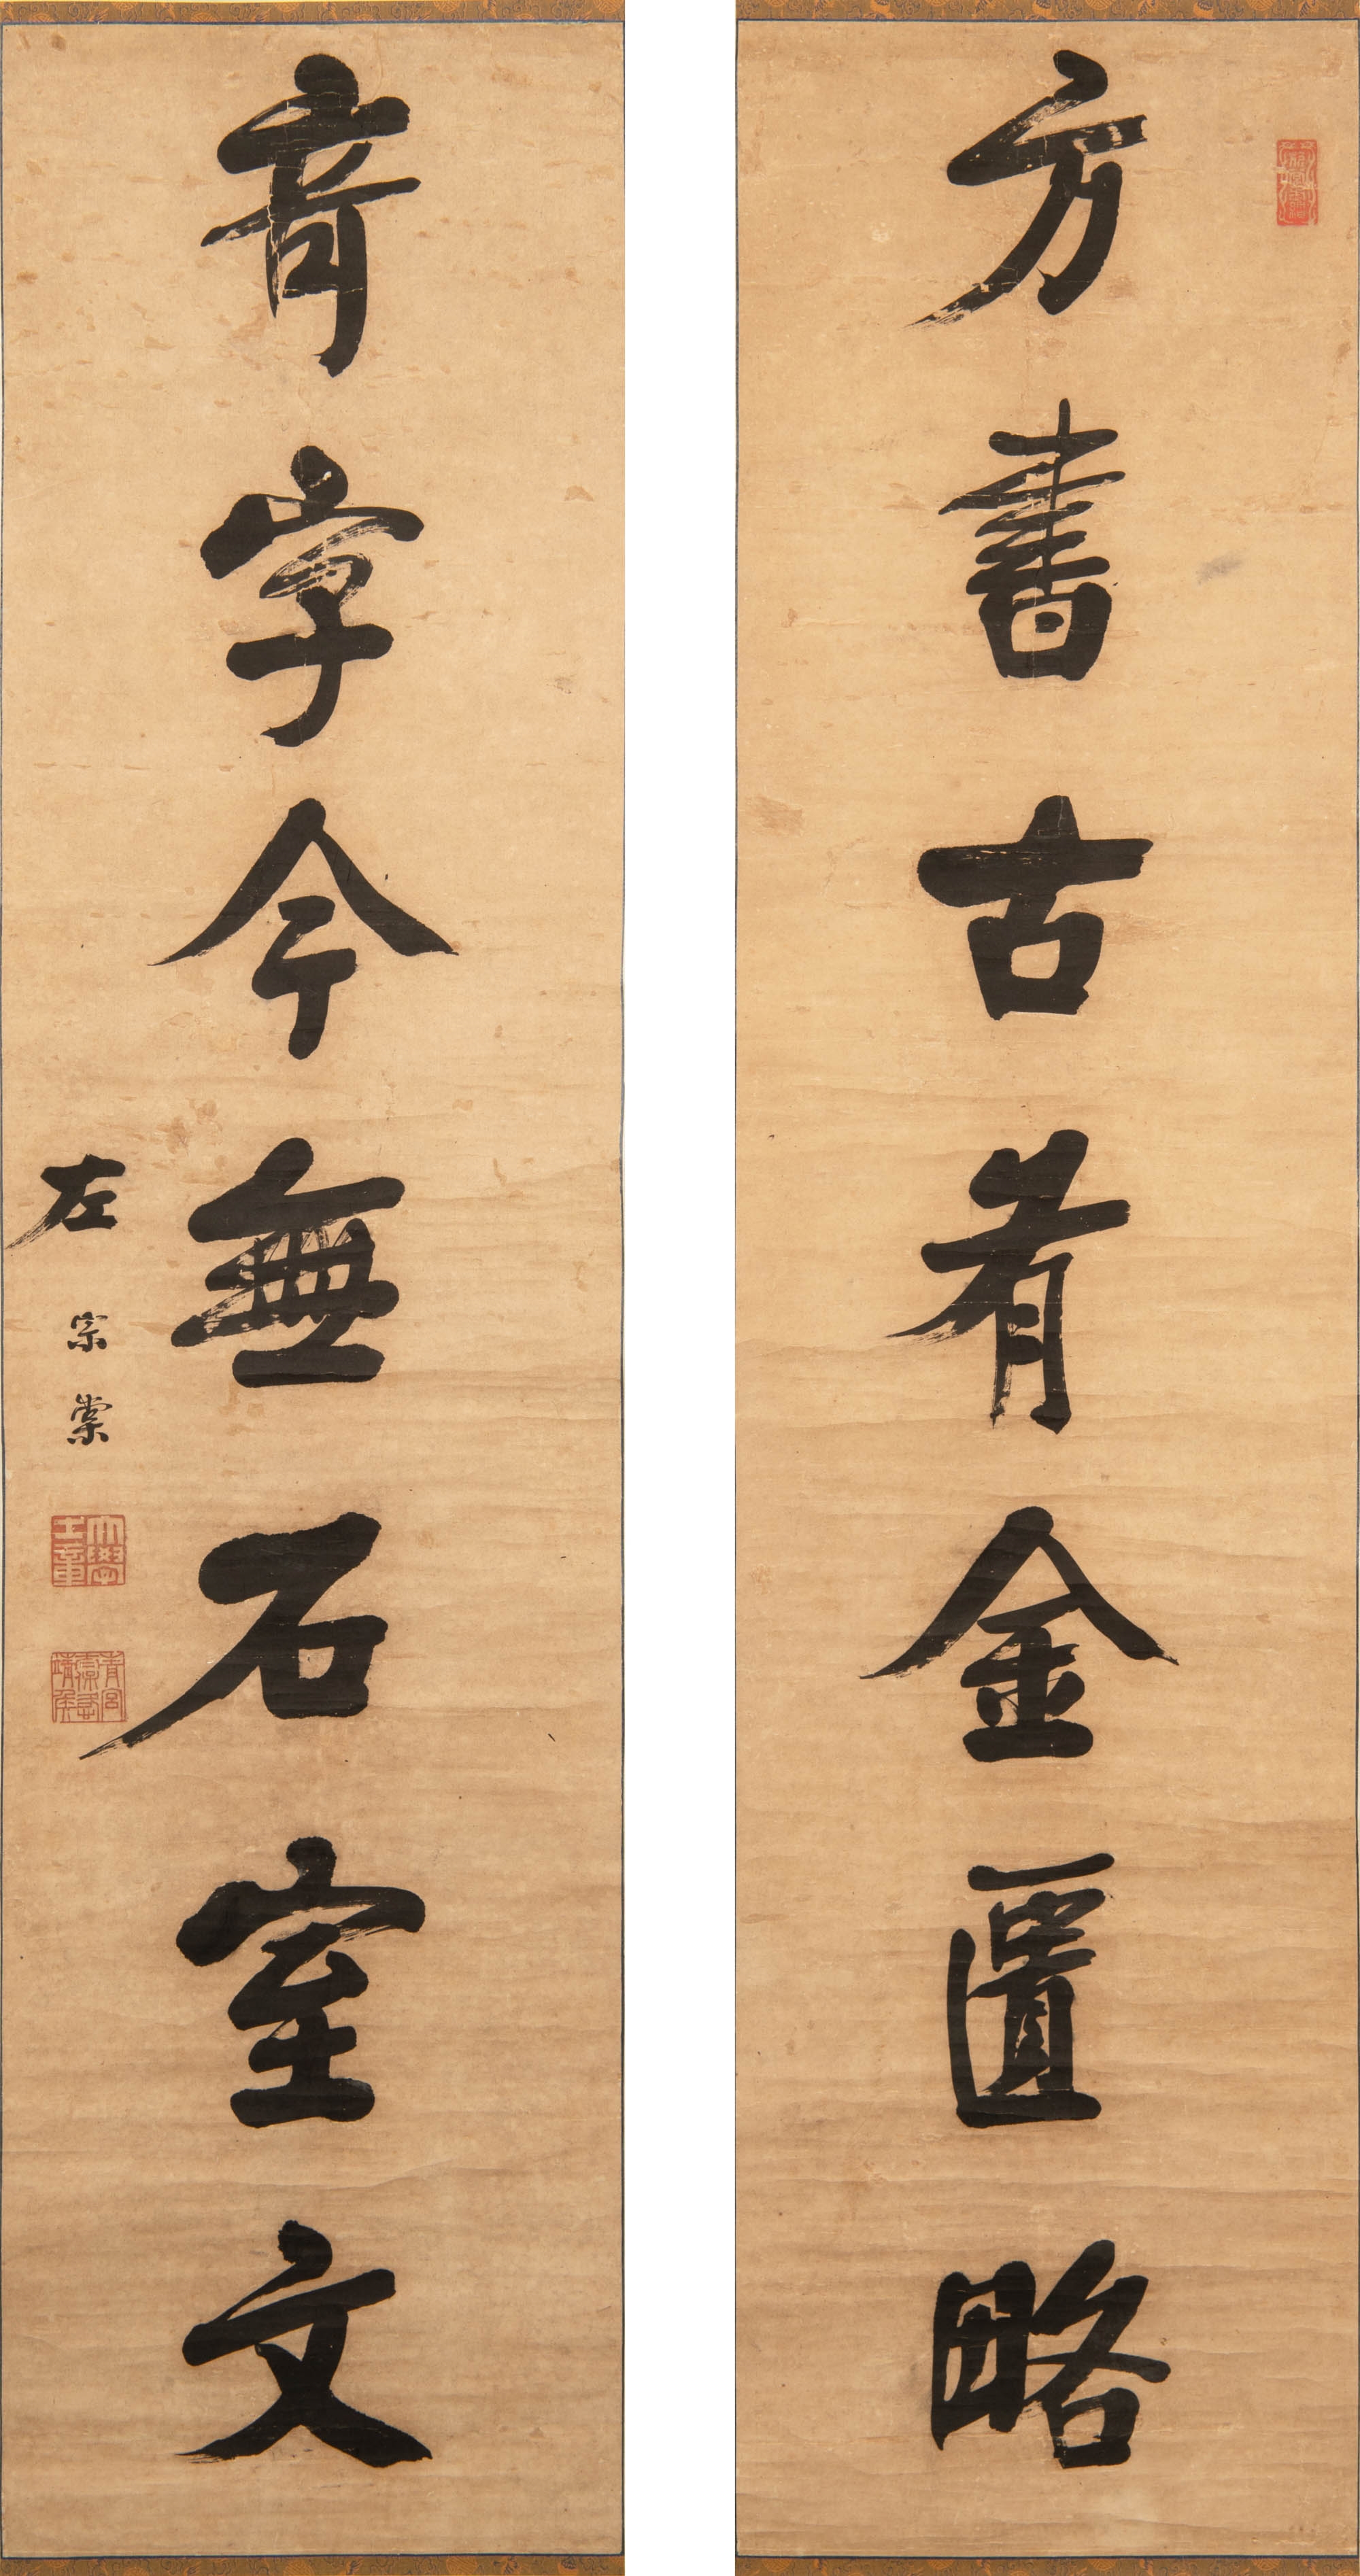 Zuo Zongtang, 左宗棠 行書七言聯 A pair of Chinese seven-character calligraphy